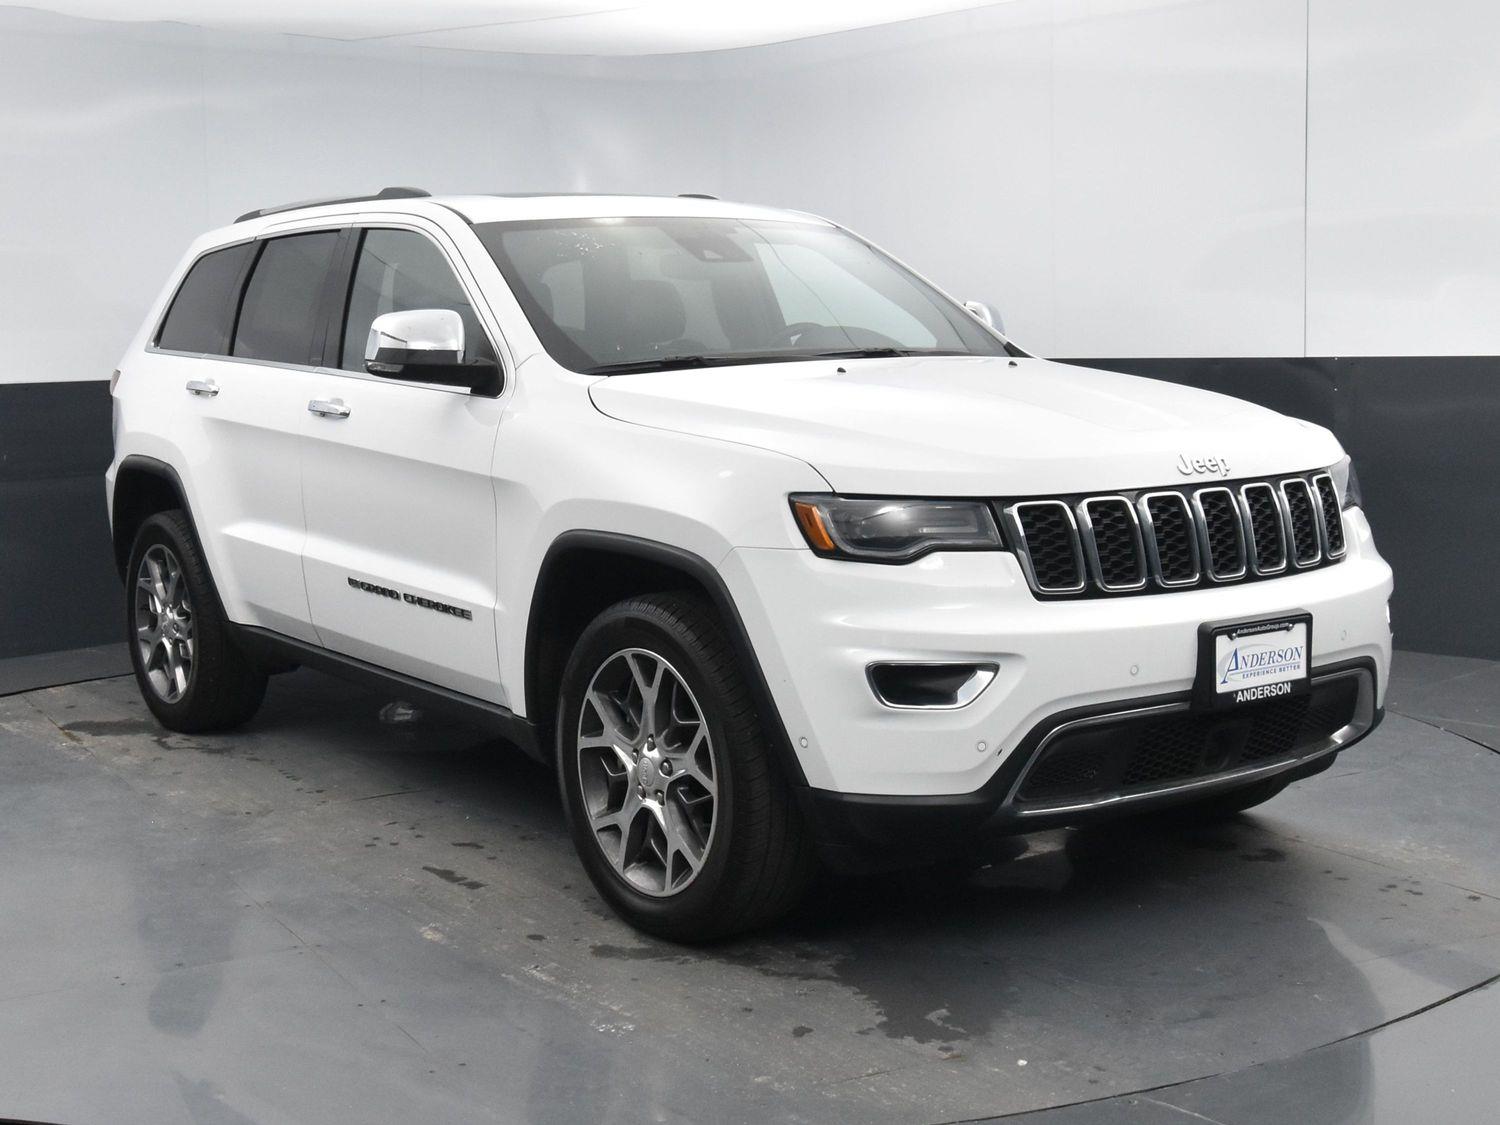 Used 2022 Jeep Grand Cherokee WK Limited SUV for sale in Grand Island NE